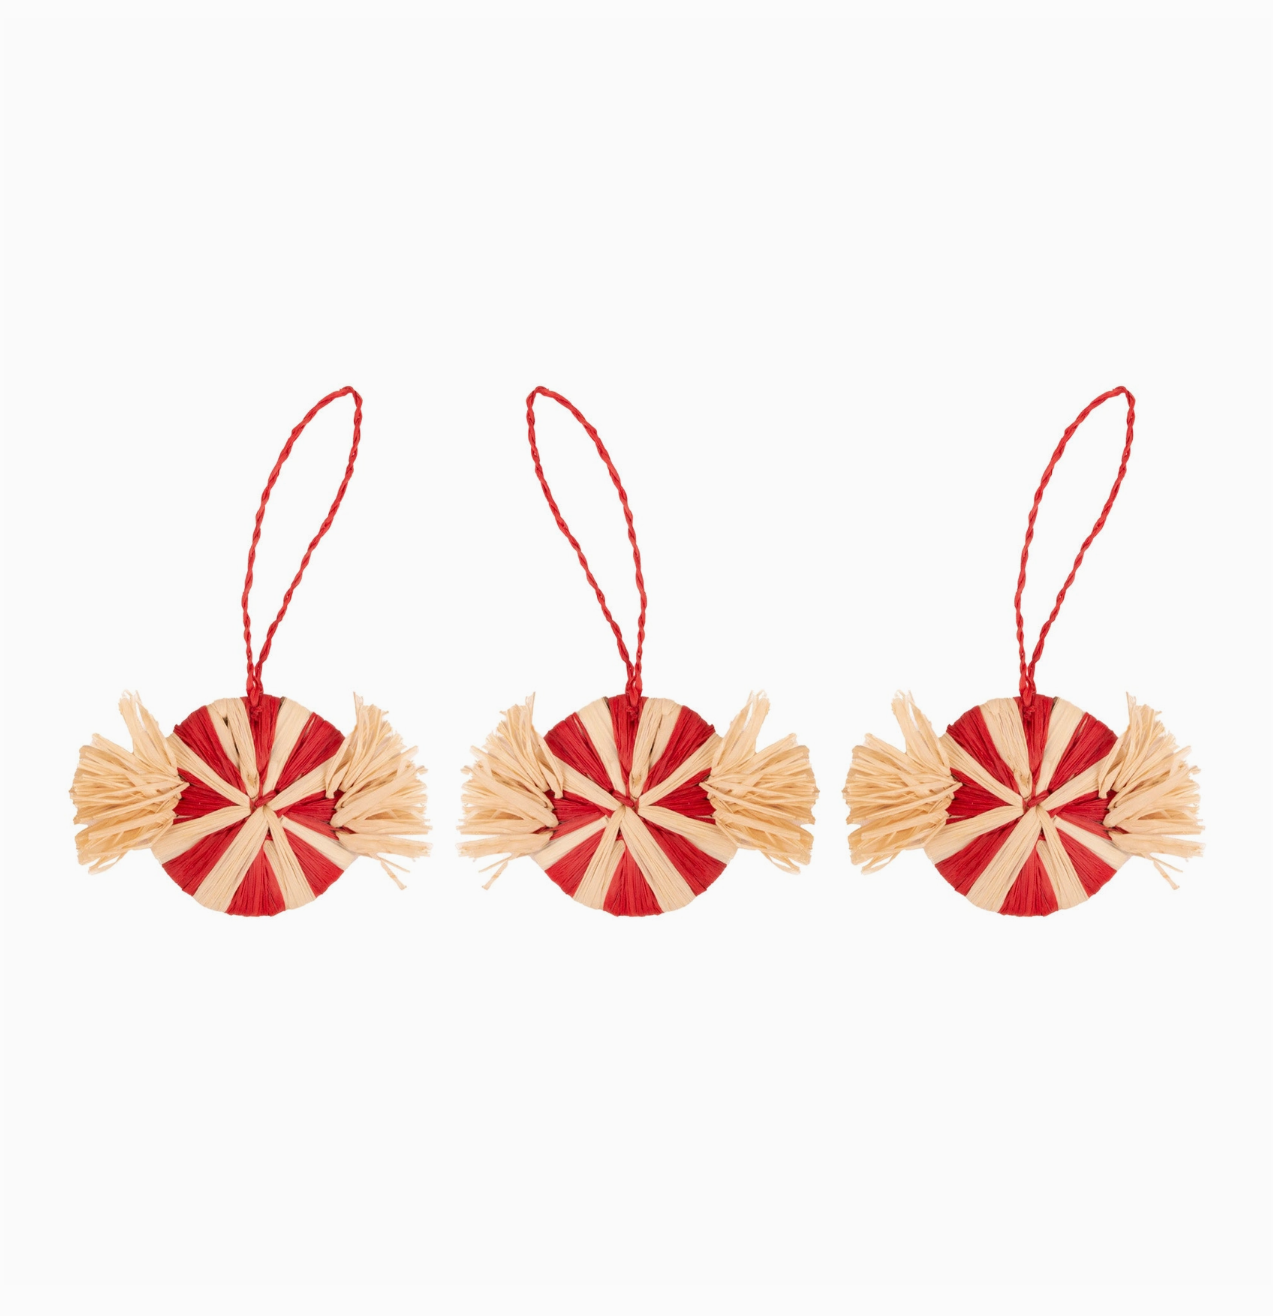 Peppermint Candy Ornaments - Set of 3